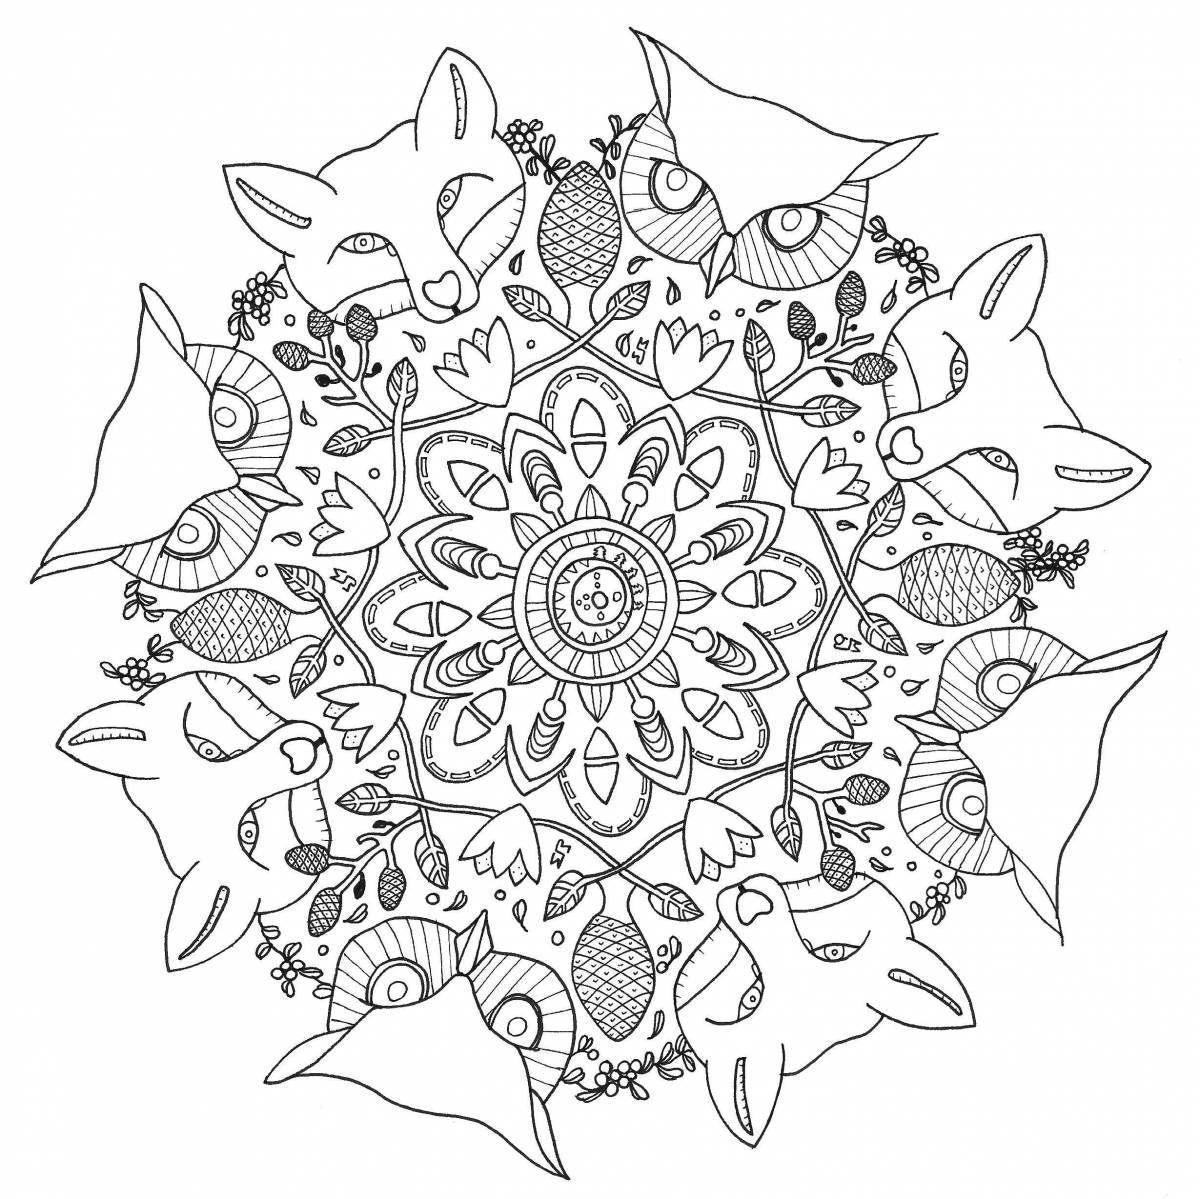 Exquisite anti-stress mandala coloring pages for kids